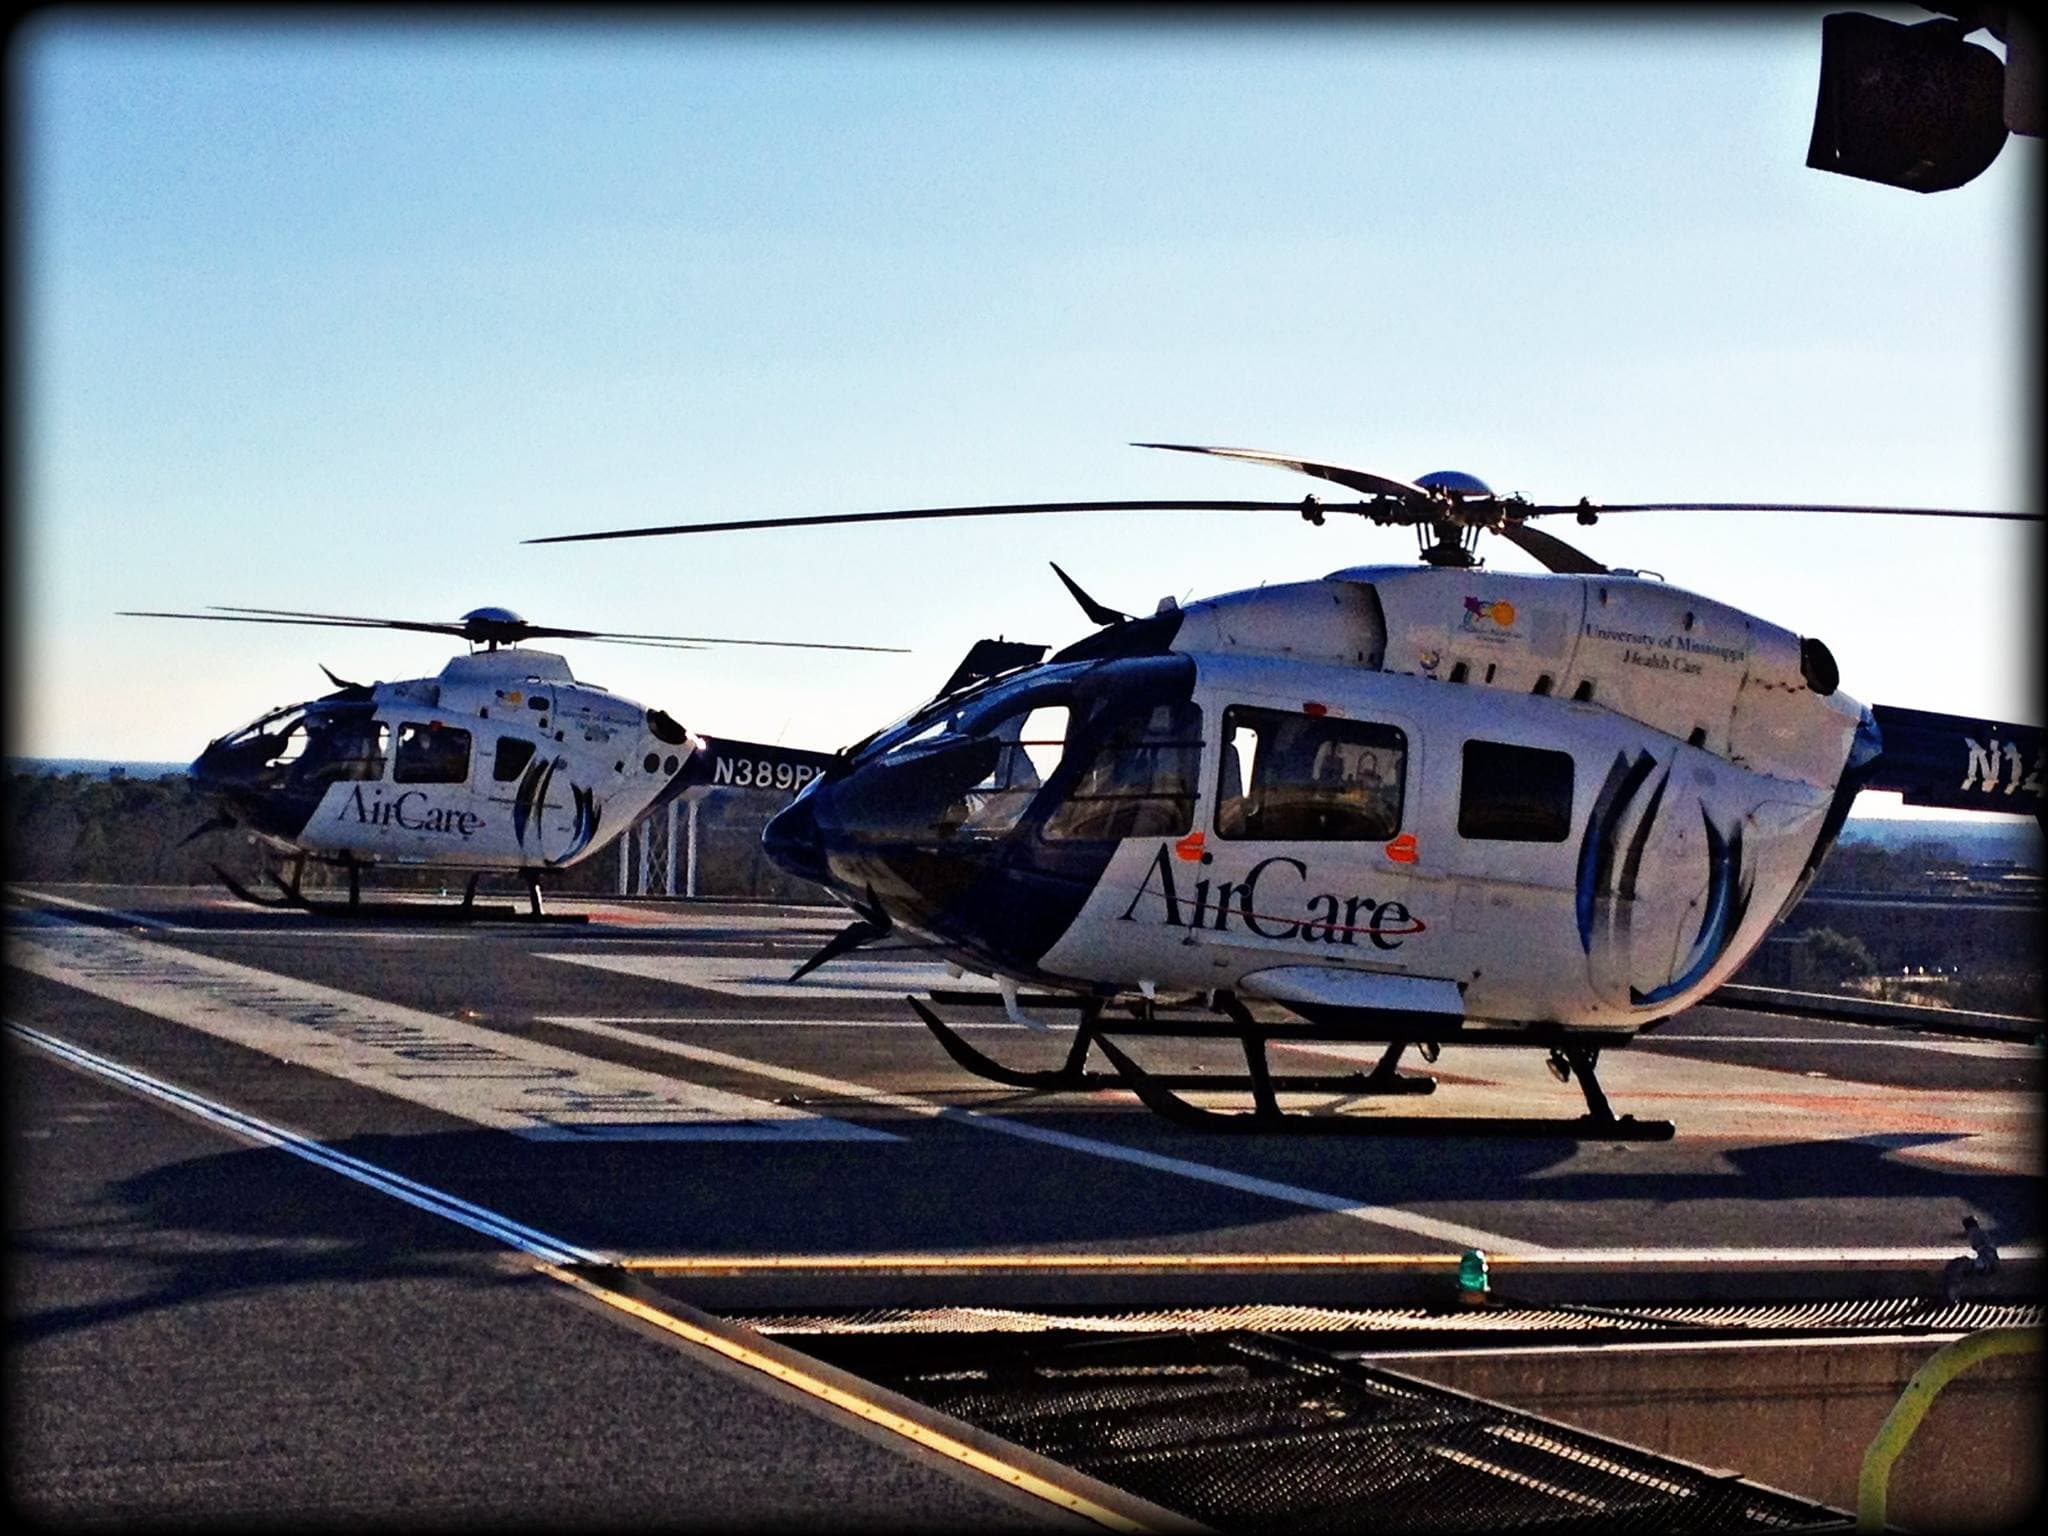 AirCare 1 and AirCare 2 on the deck at UMMC